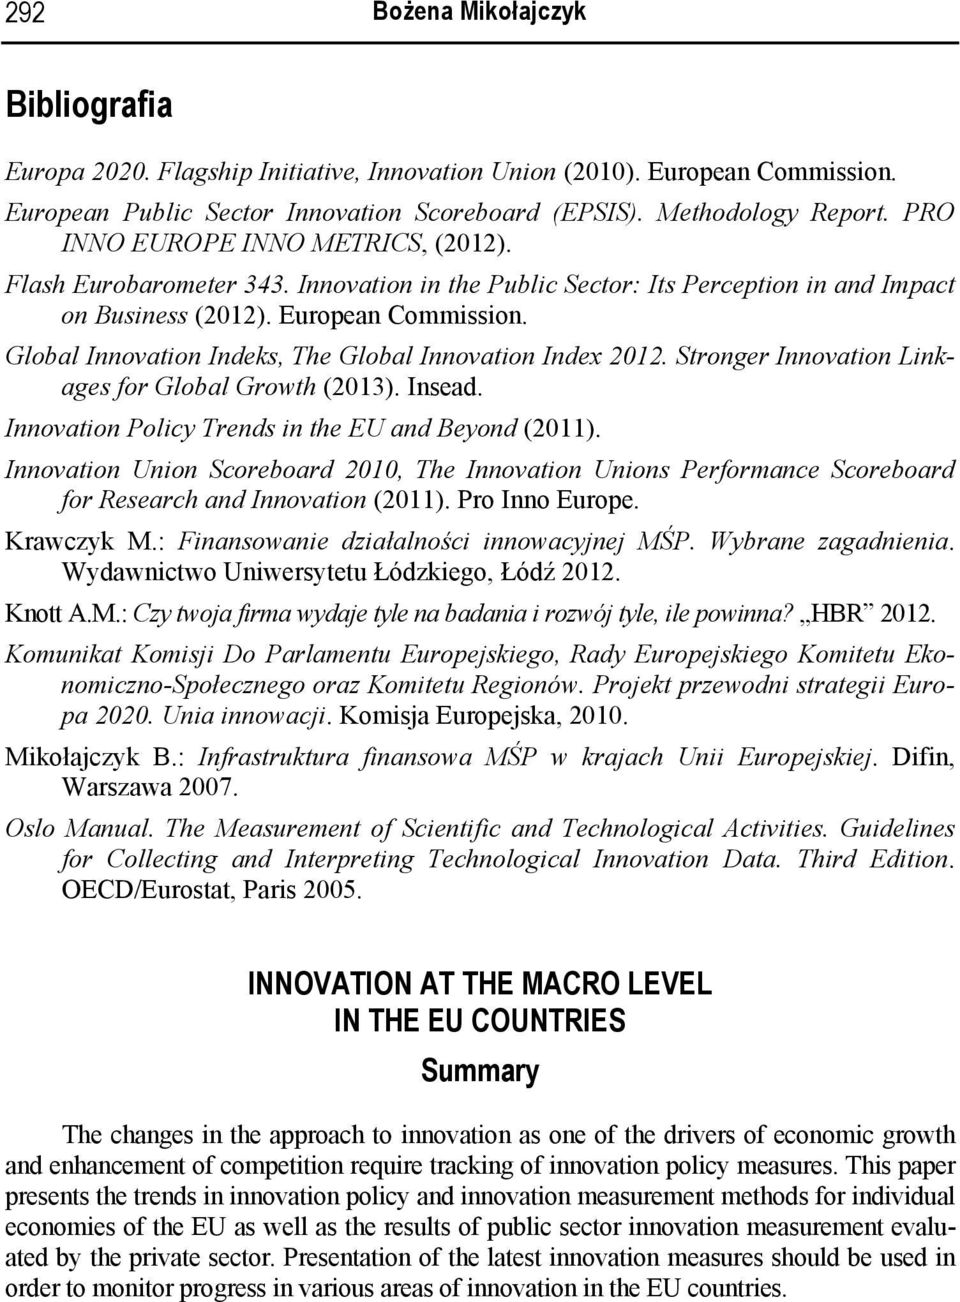 Global Innovation Indeks, The Global Innovation Index 2012. Stronger Innovation Linkages for Global Growth (2013). Insead. Innovation Policy Trends in the EU and Beyond (2011).